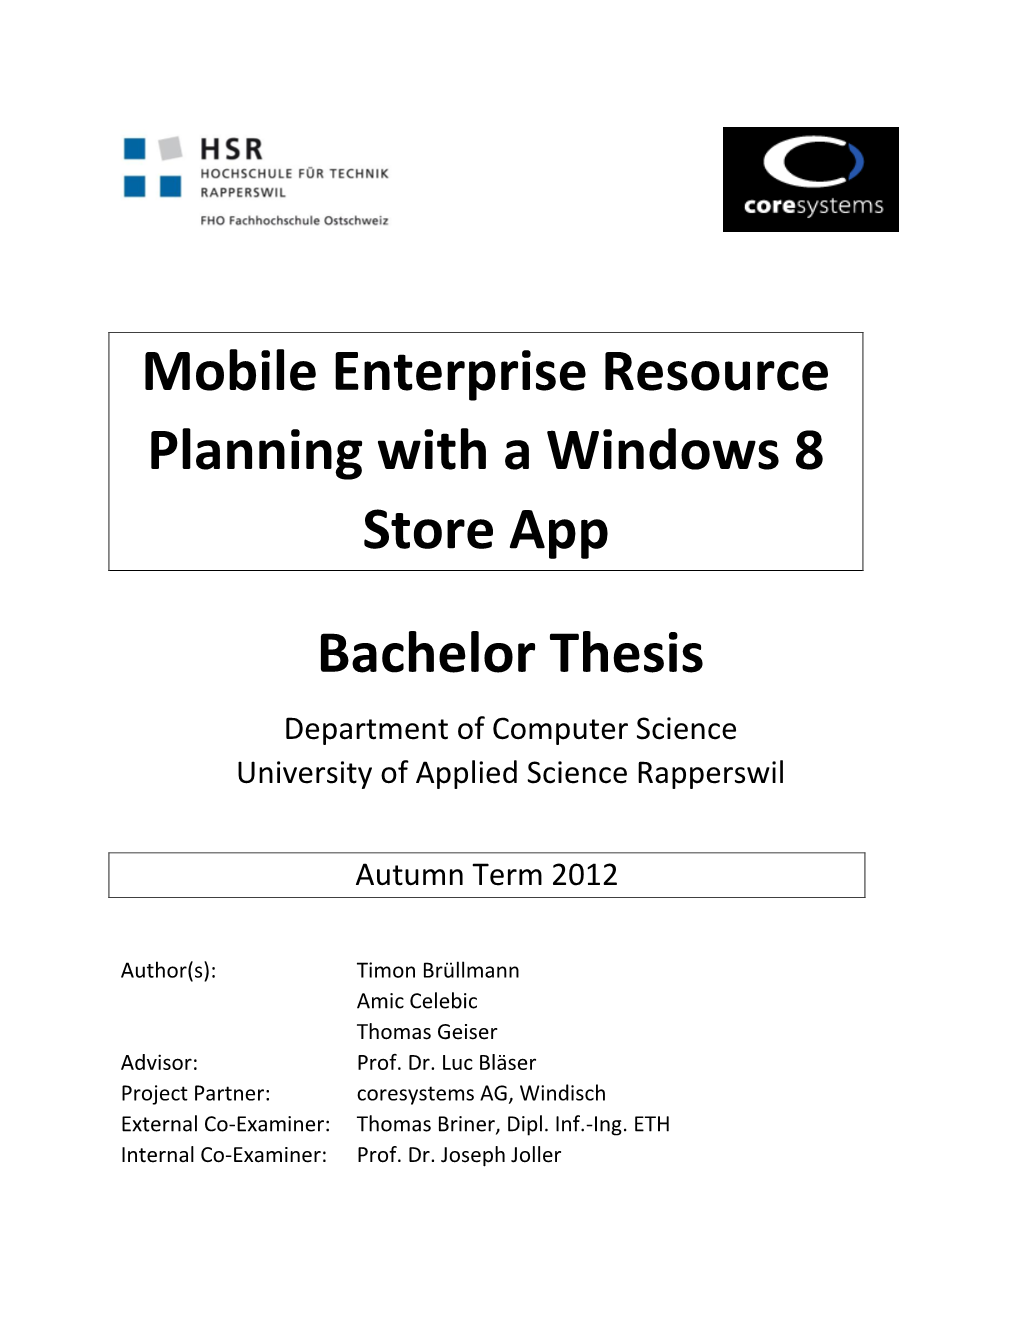 Mobile Enterprise Resource Planning with a Windows 8 Store App